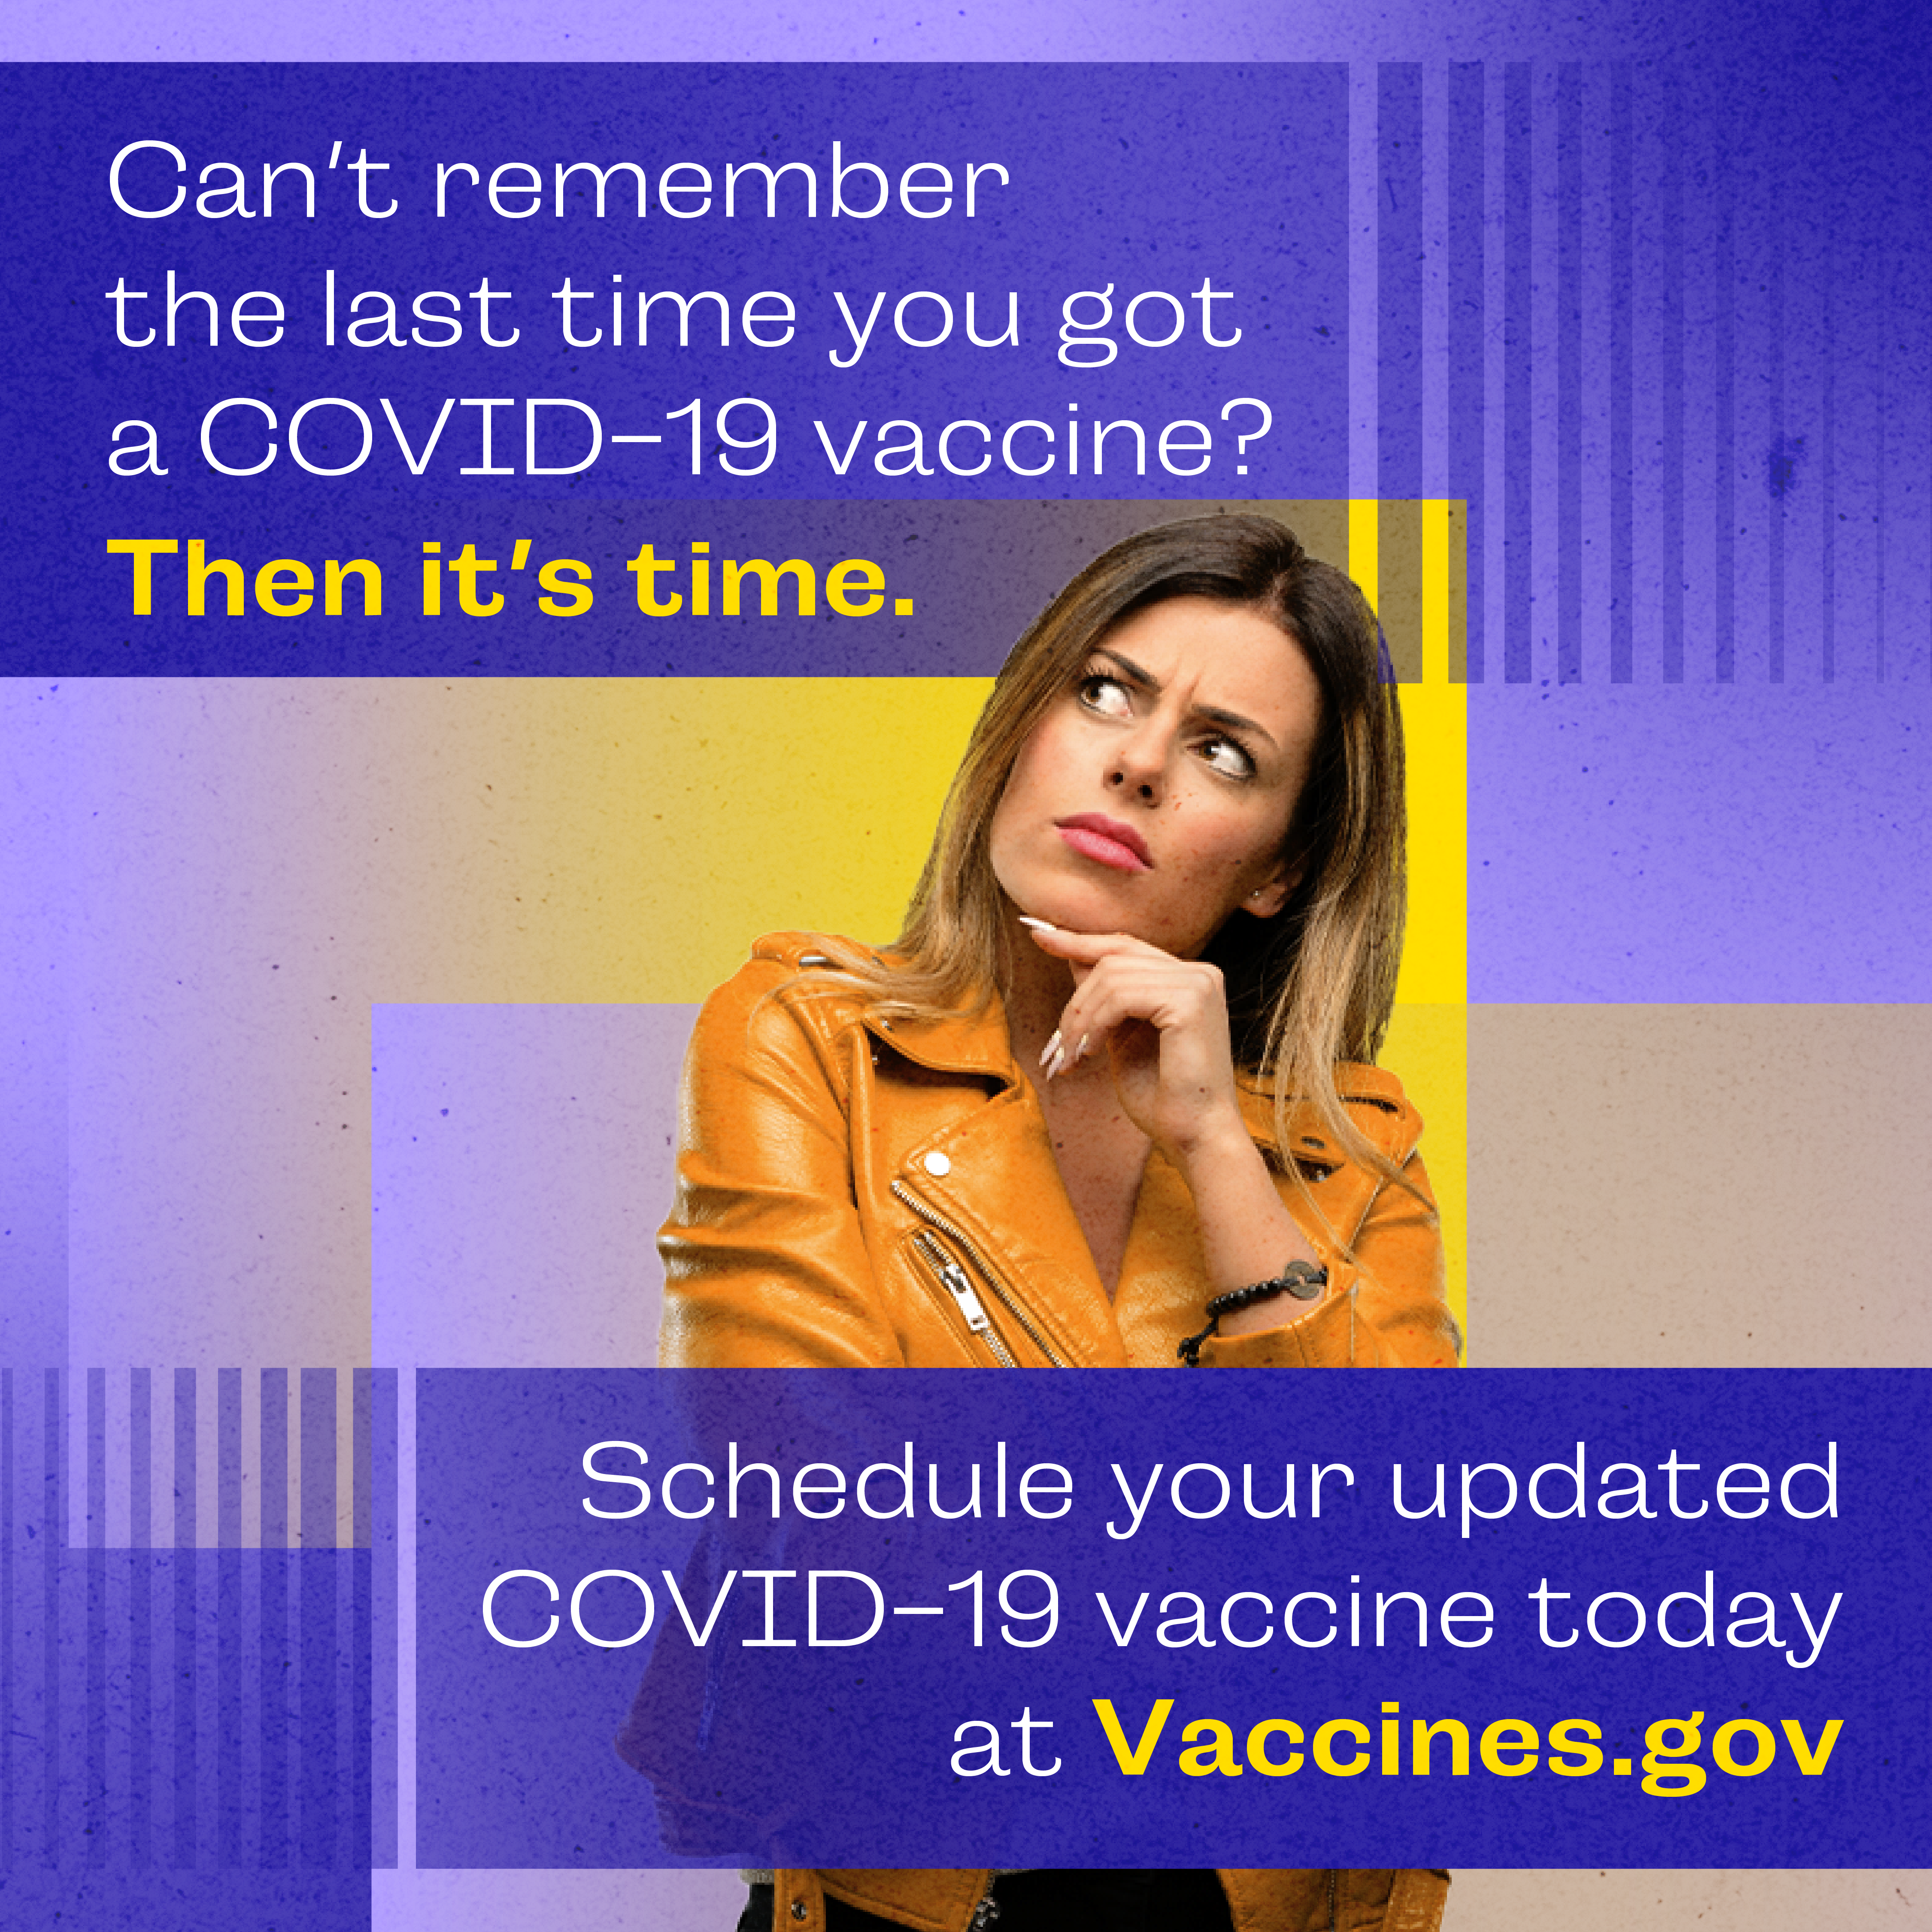 A Hispanic/Latina woman with a pensive look on her face poses in while thought. Text reads, "can't remember the last time you got a COVID-19 vaccine? Then it's time. Schedule your updated COVID-19 vaccine today at vaccines.gov."